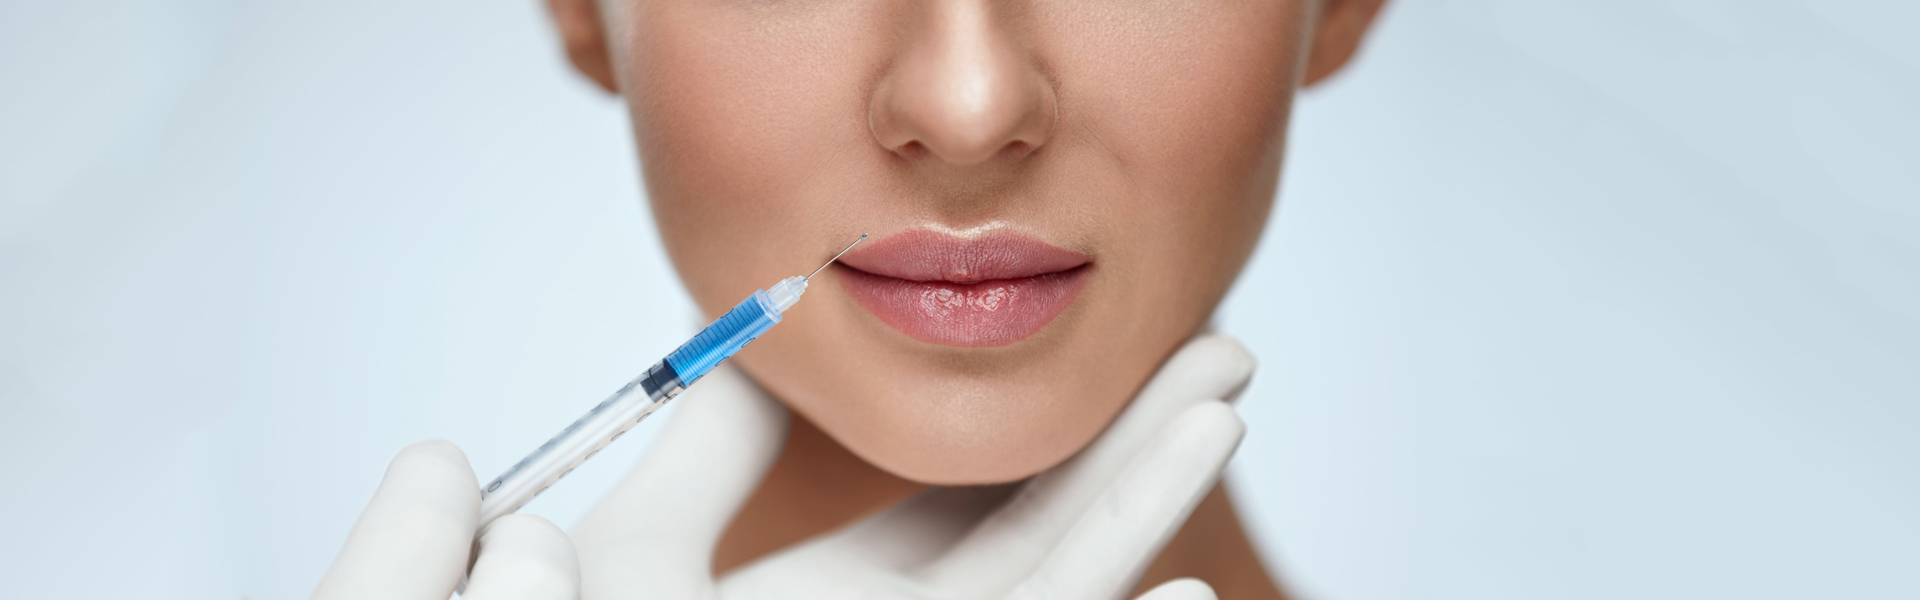 Lip Injection Procedures and Who Needs It? 